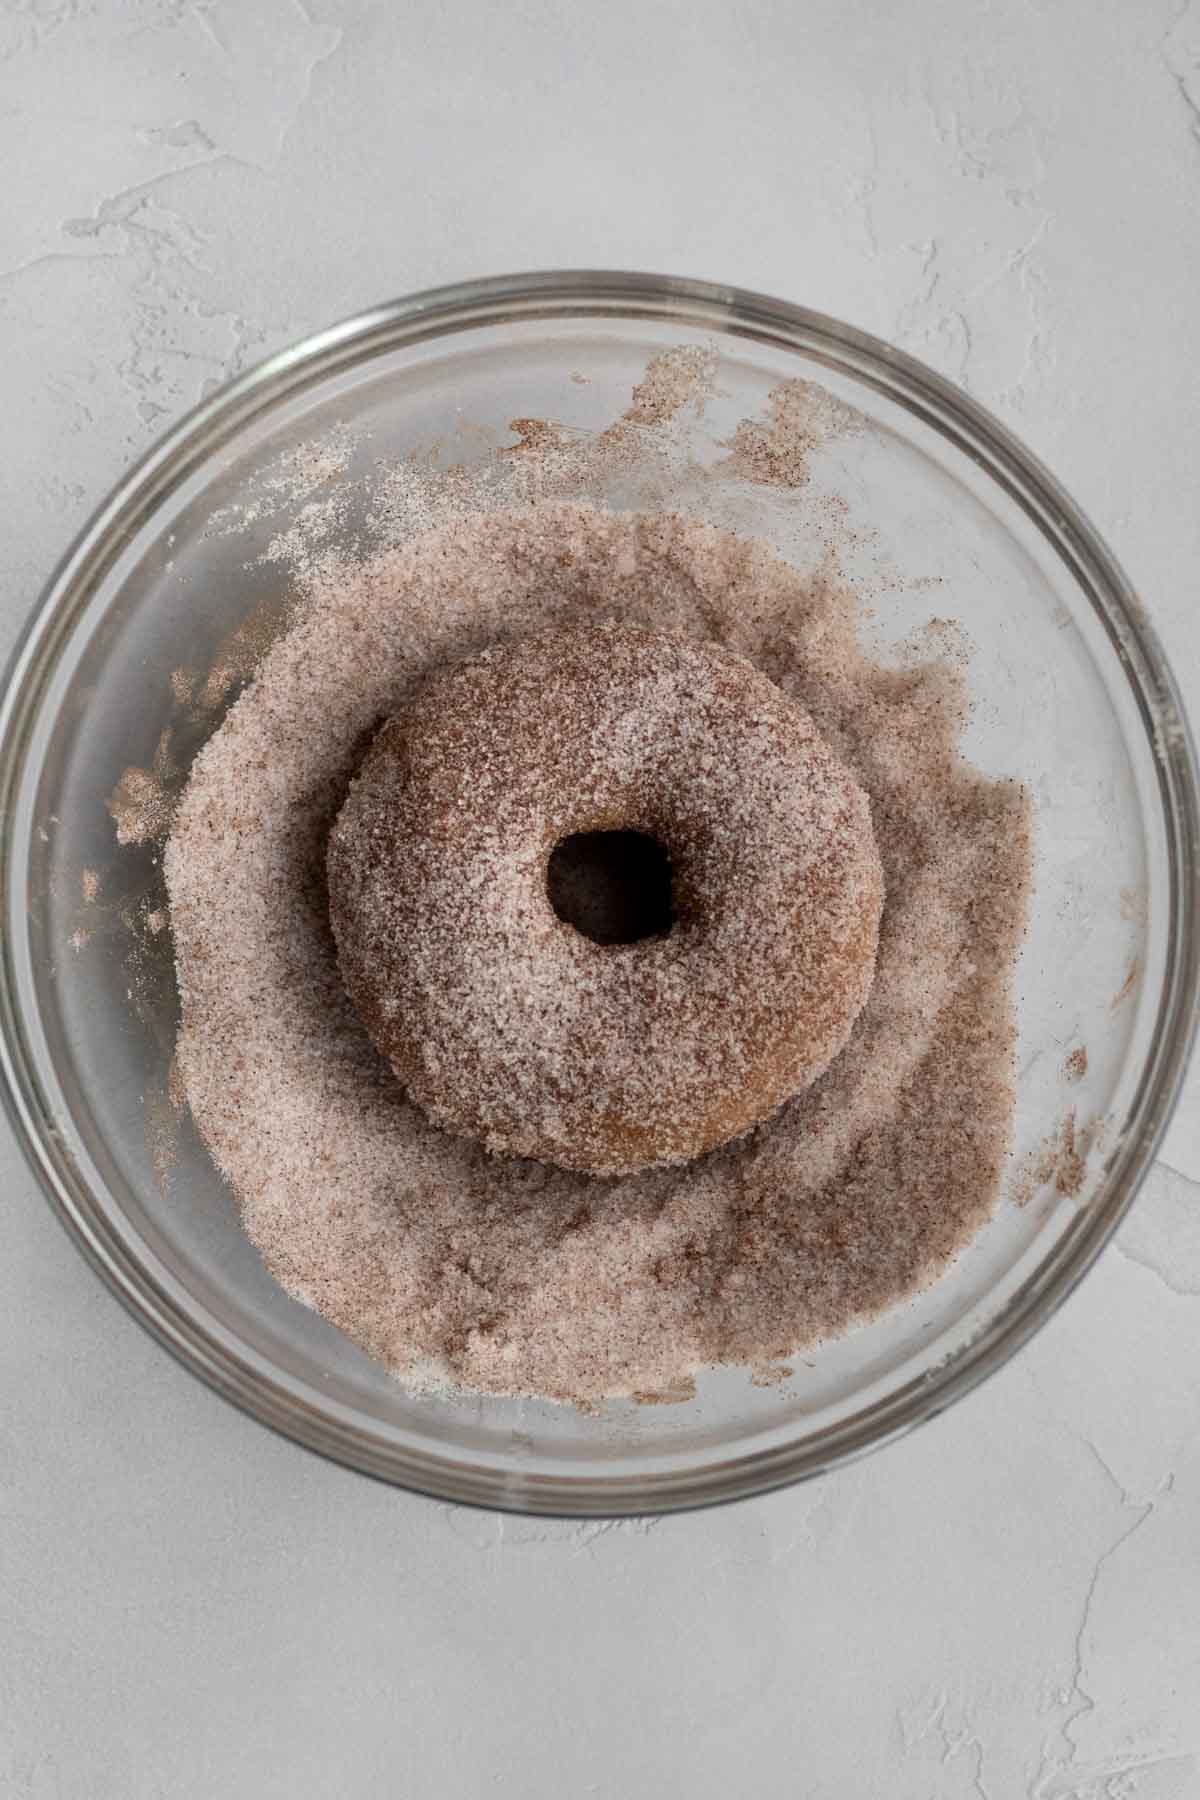 Covering the donut with cinnamon sugar.